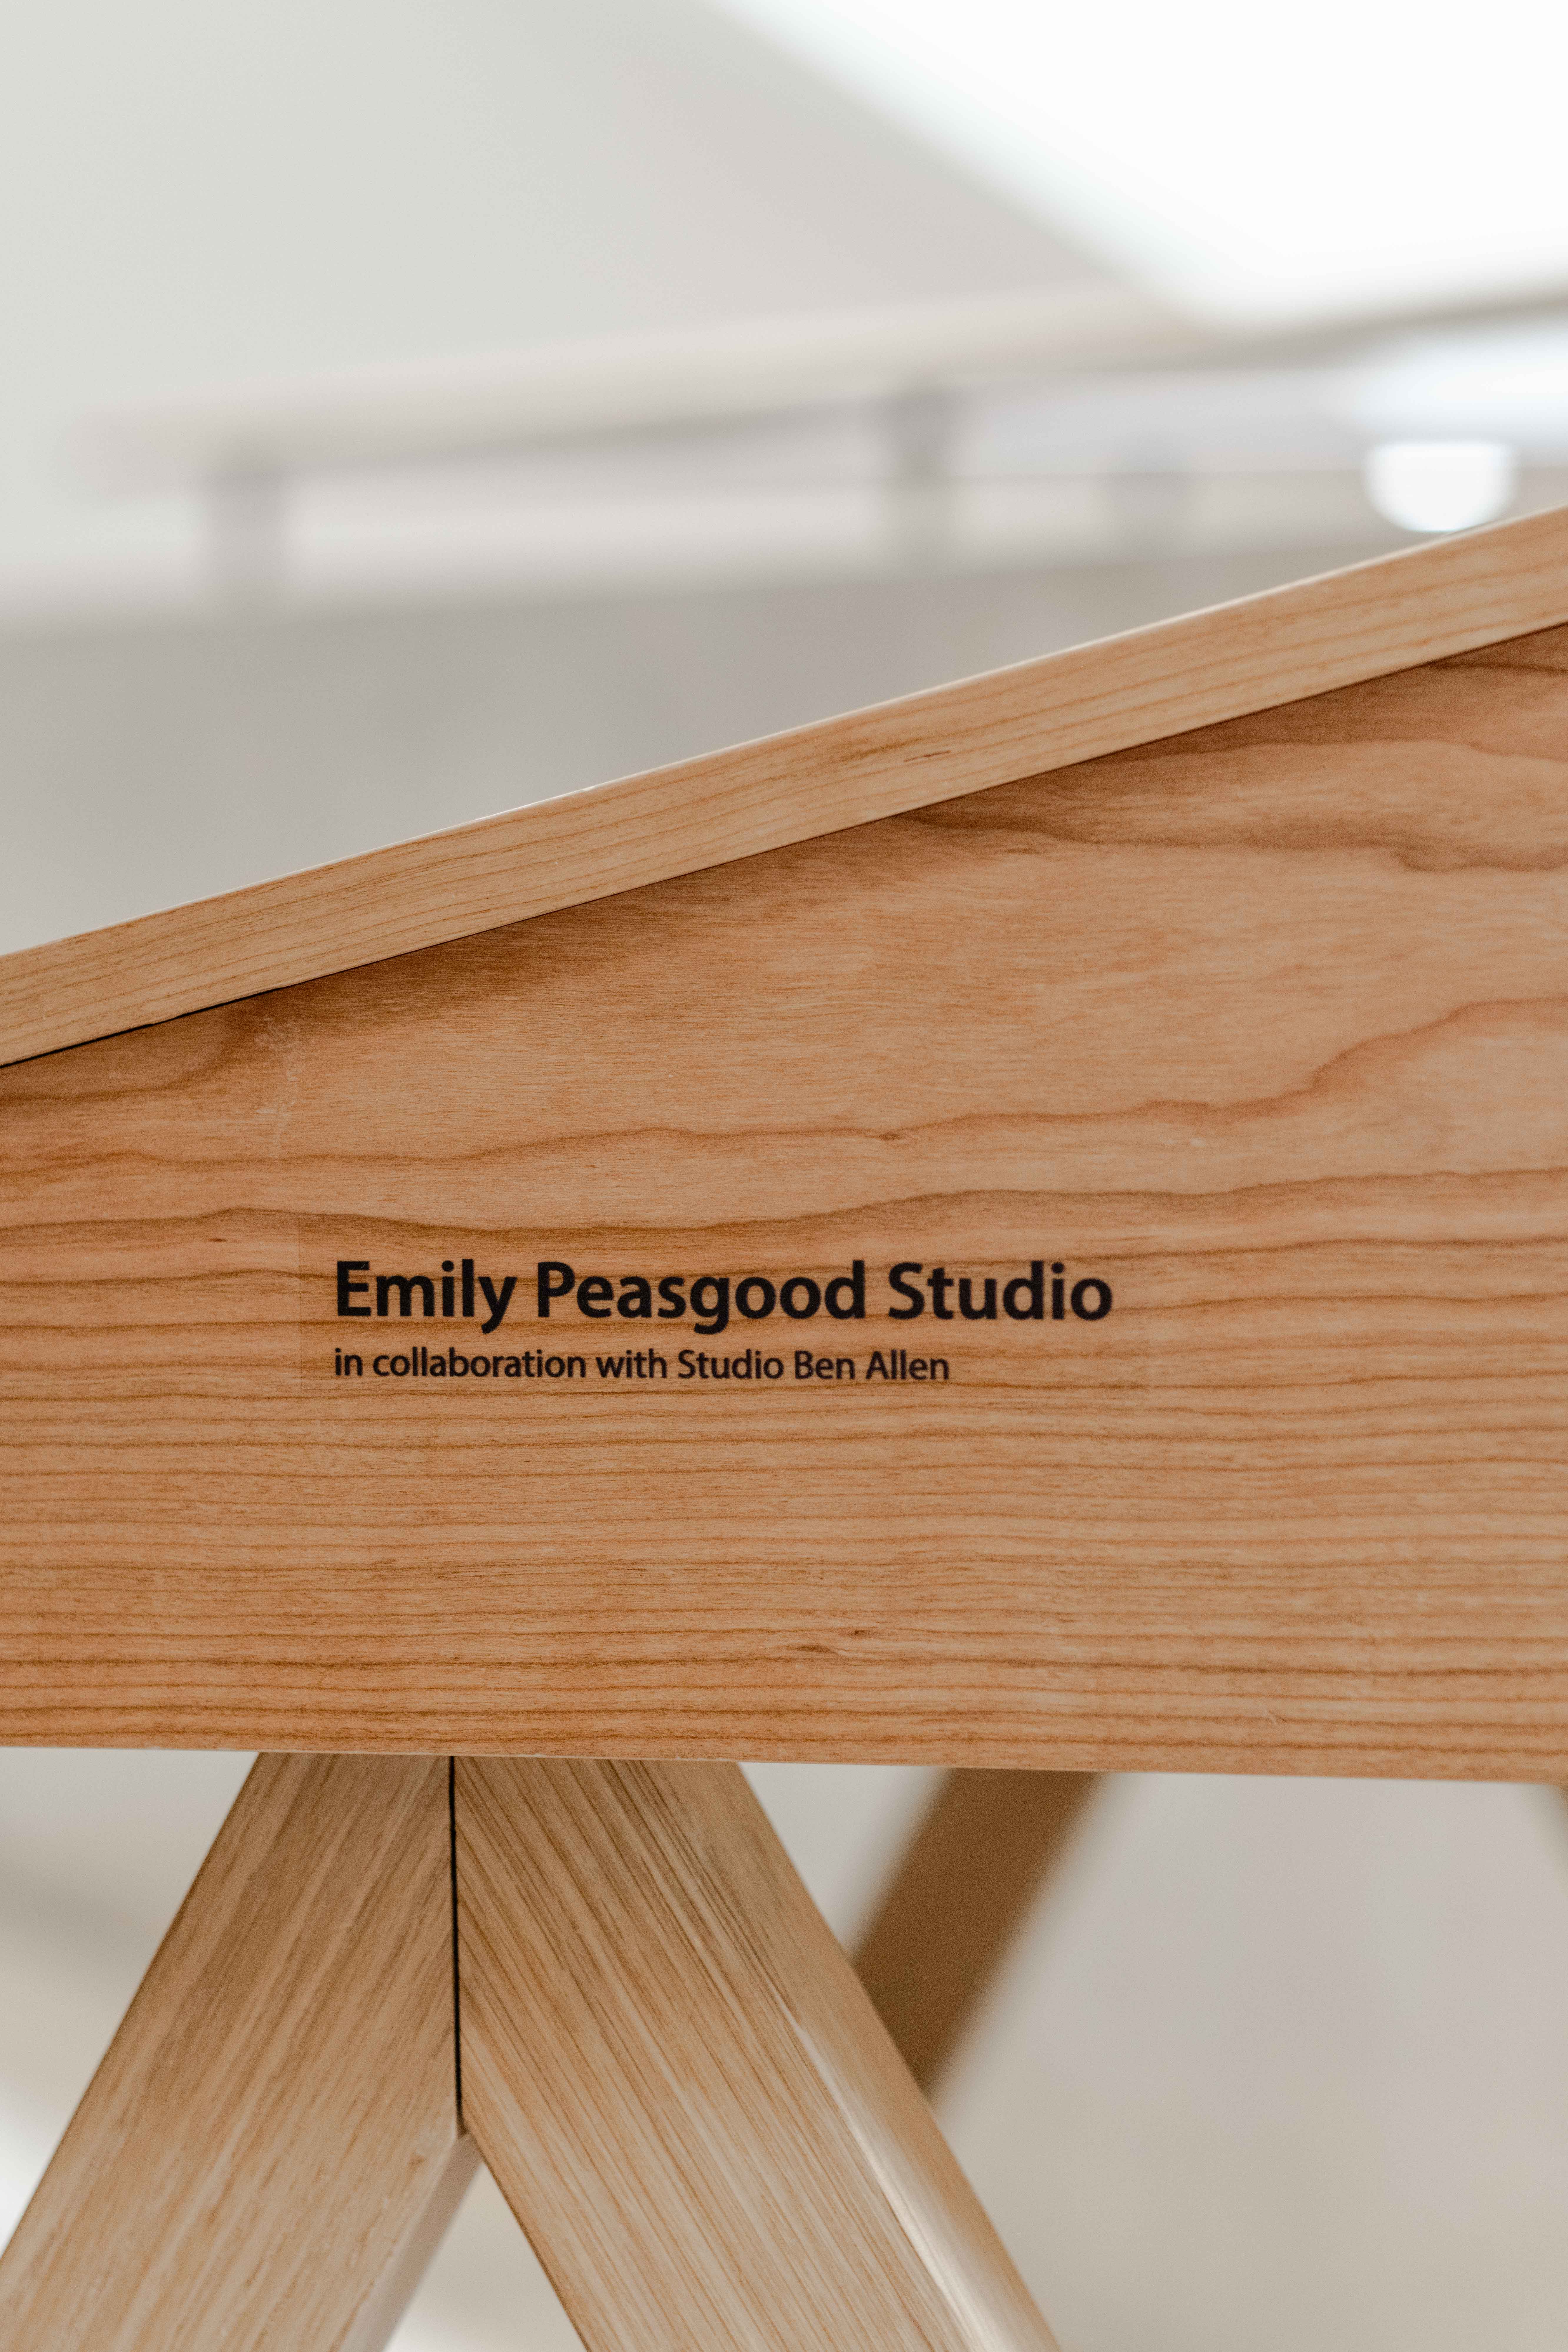 Close up of Emily Peasgood's Listening Desk. Side view of the maker's mark which states: Emily Peasgood Studio, in Collaboration with Ben Allen.